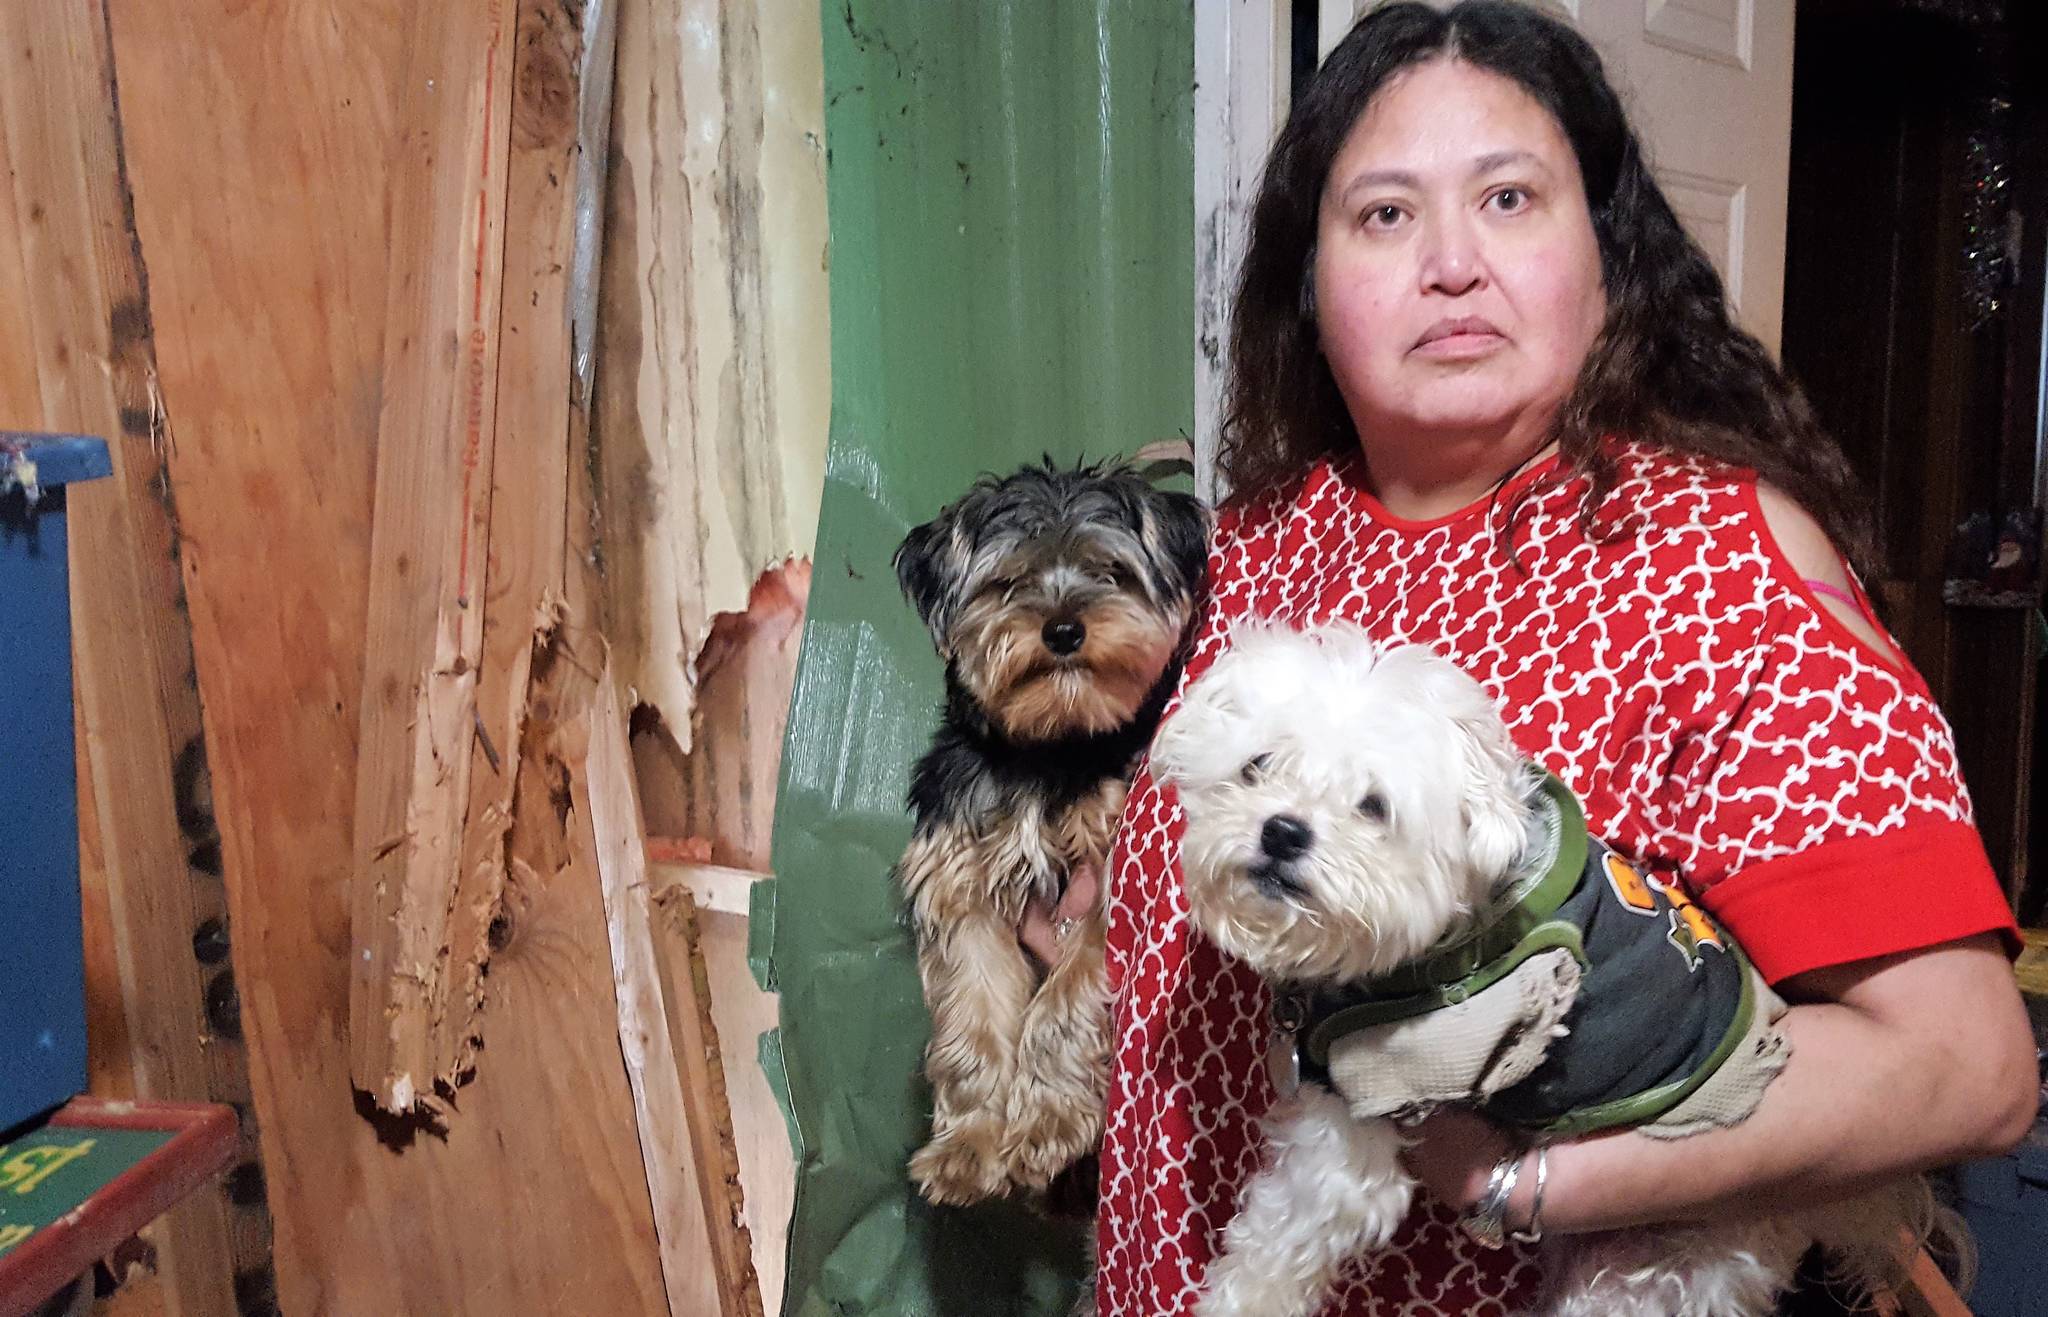 Leoni Johnson credits her dogs, Rocky and Buttons, for alerting her to the bear in her arctic entry Tuesday morning. (Liz Kellar | Juneau Empire)